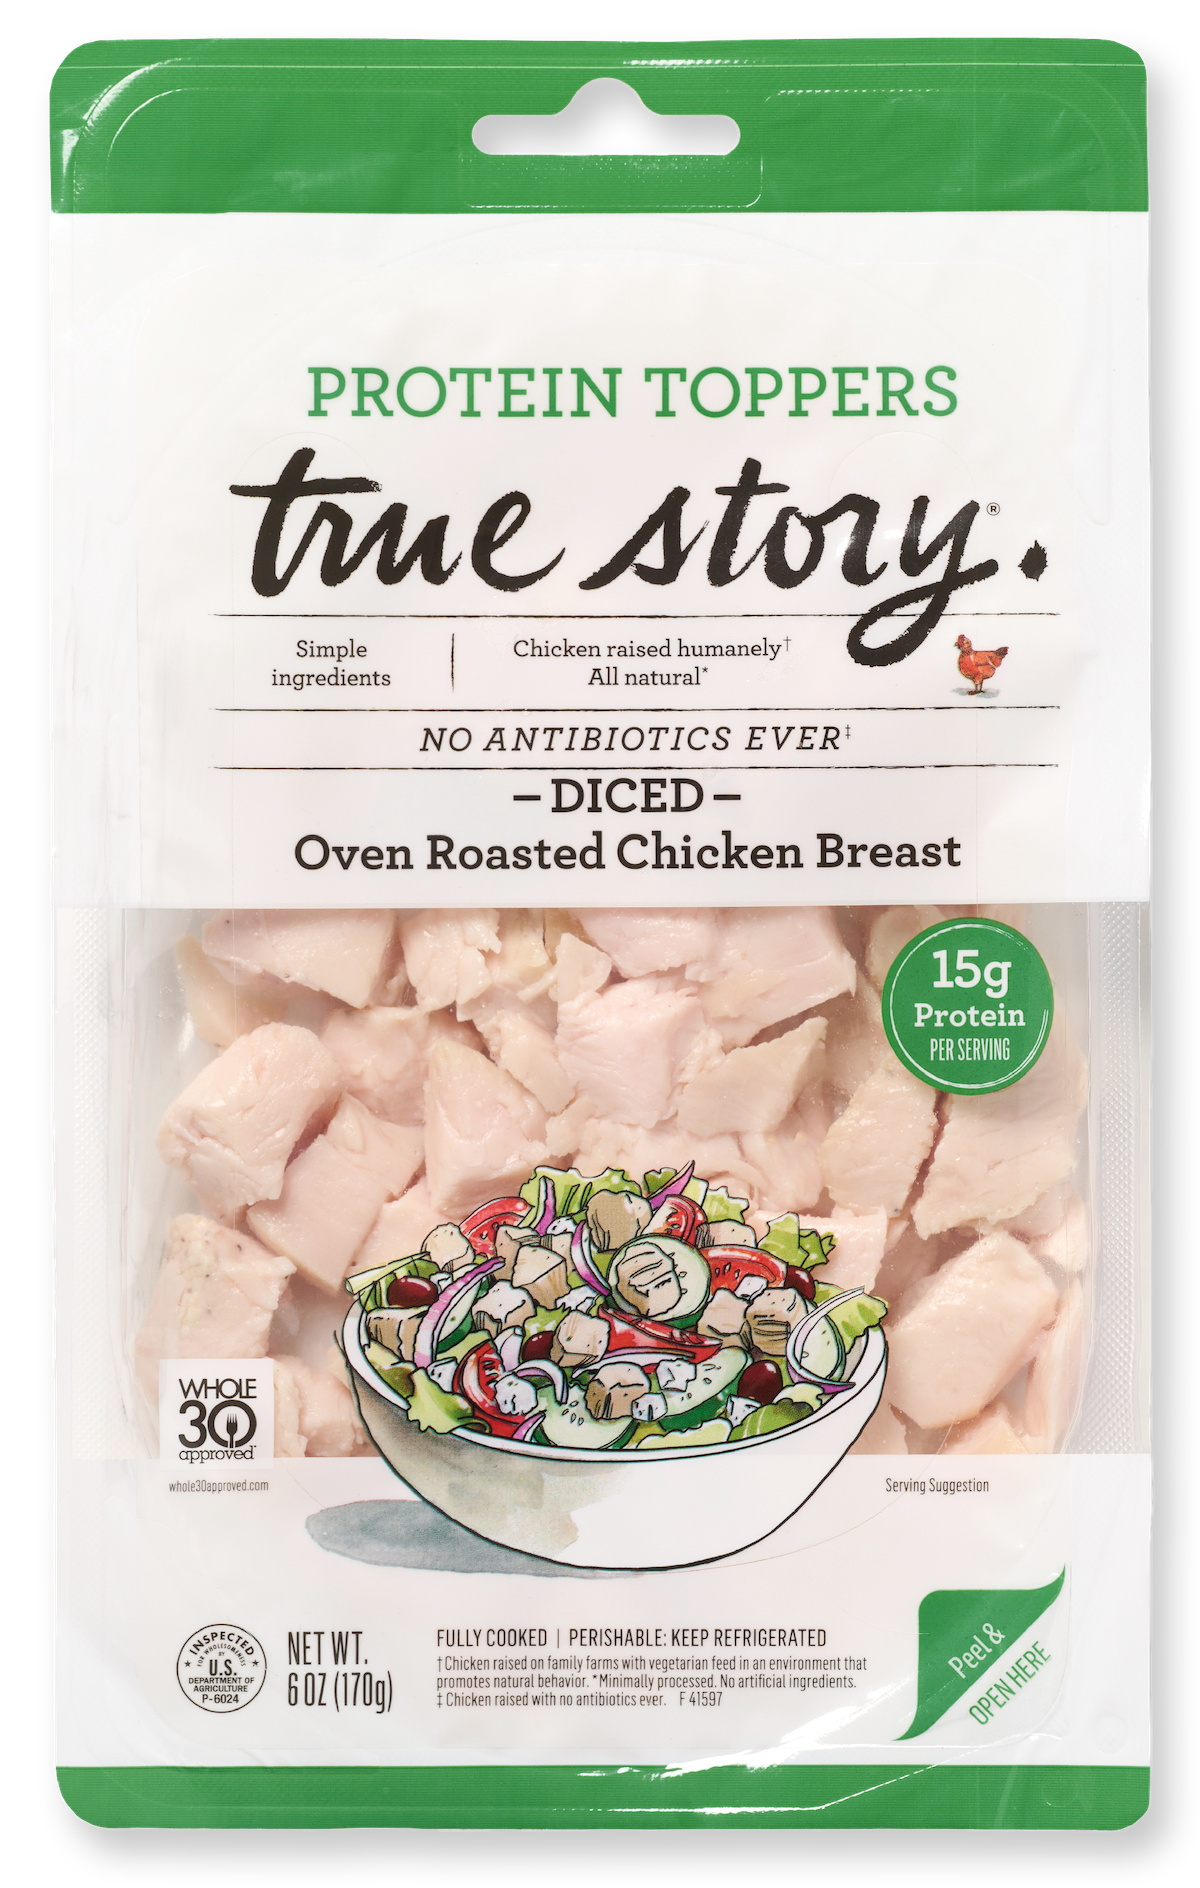 Protein Toppers Oven Roasted Chicken Breast Packaging